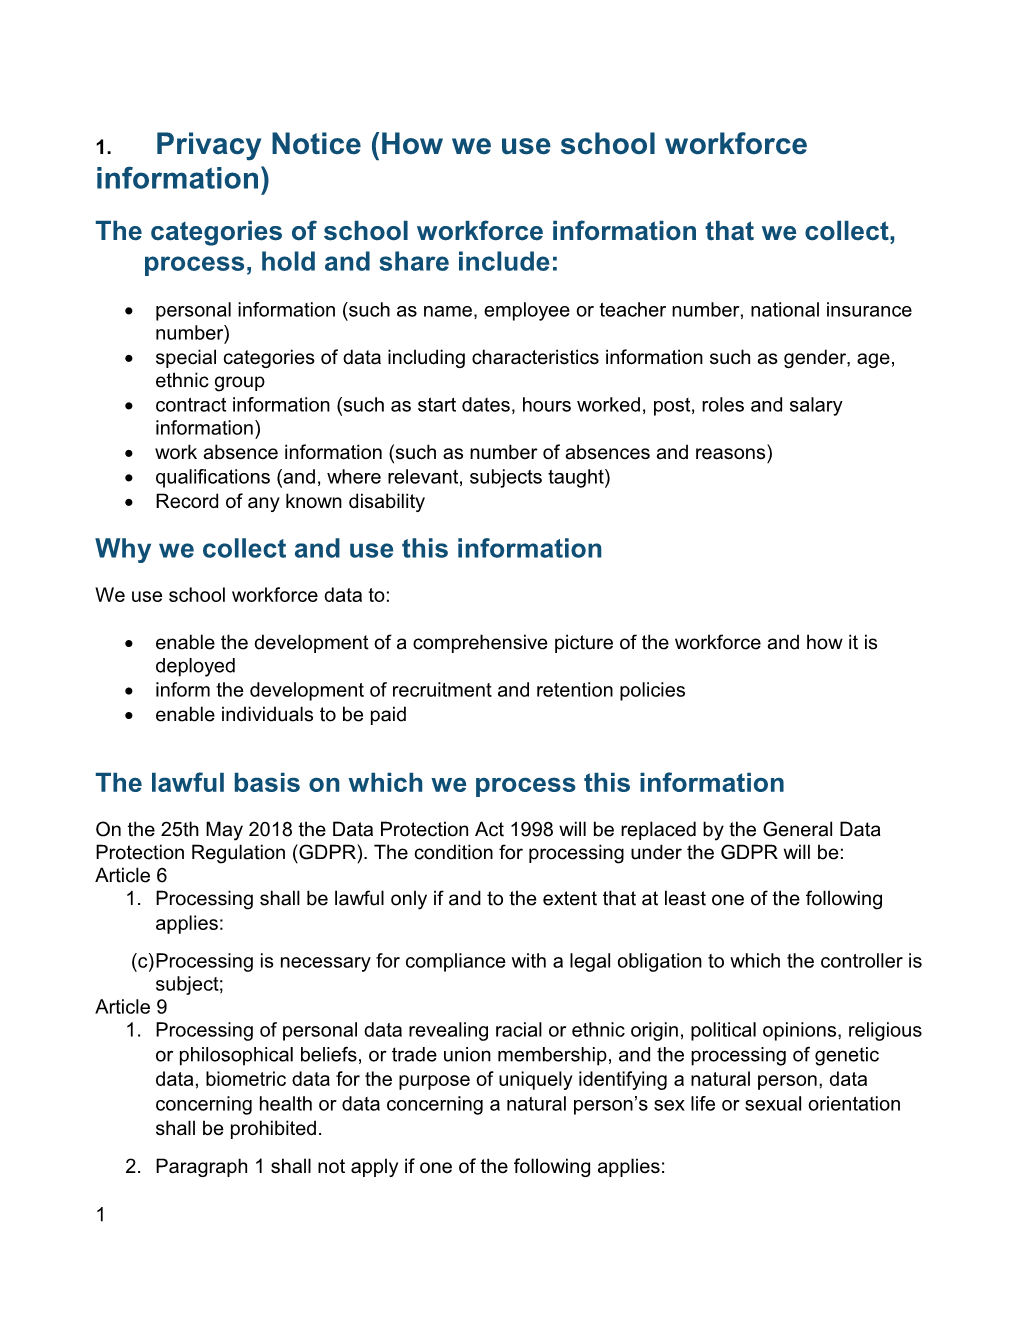 Privacy Notice (How We Use School Workforce Information)